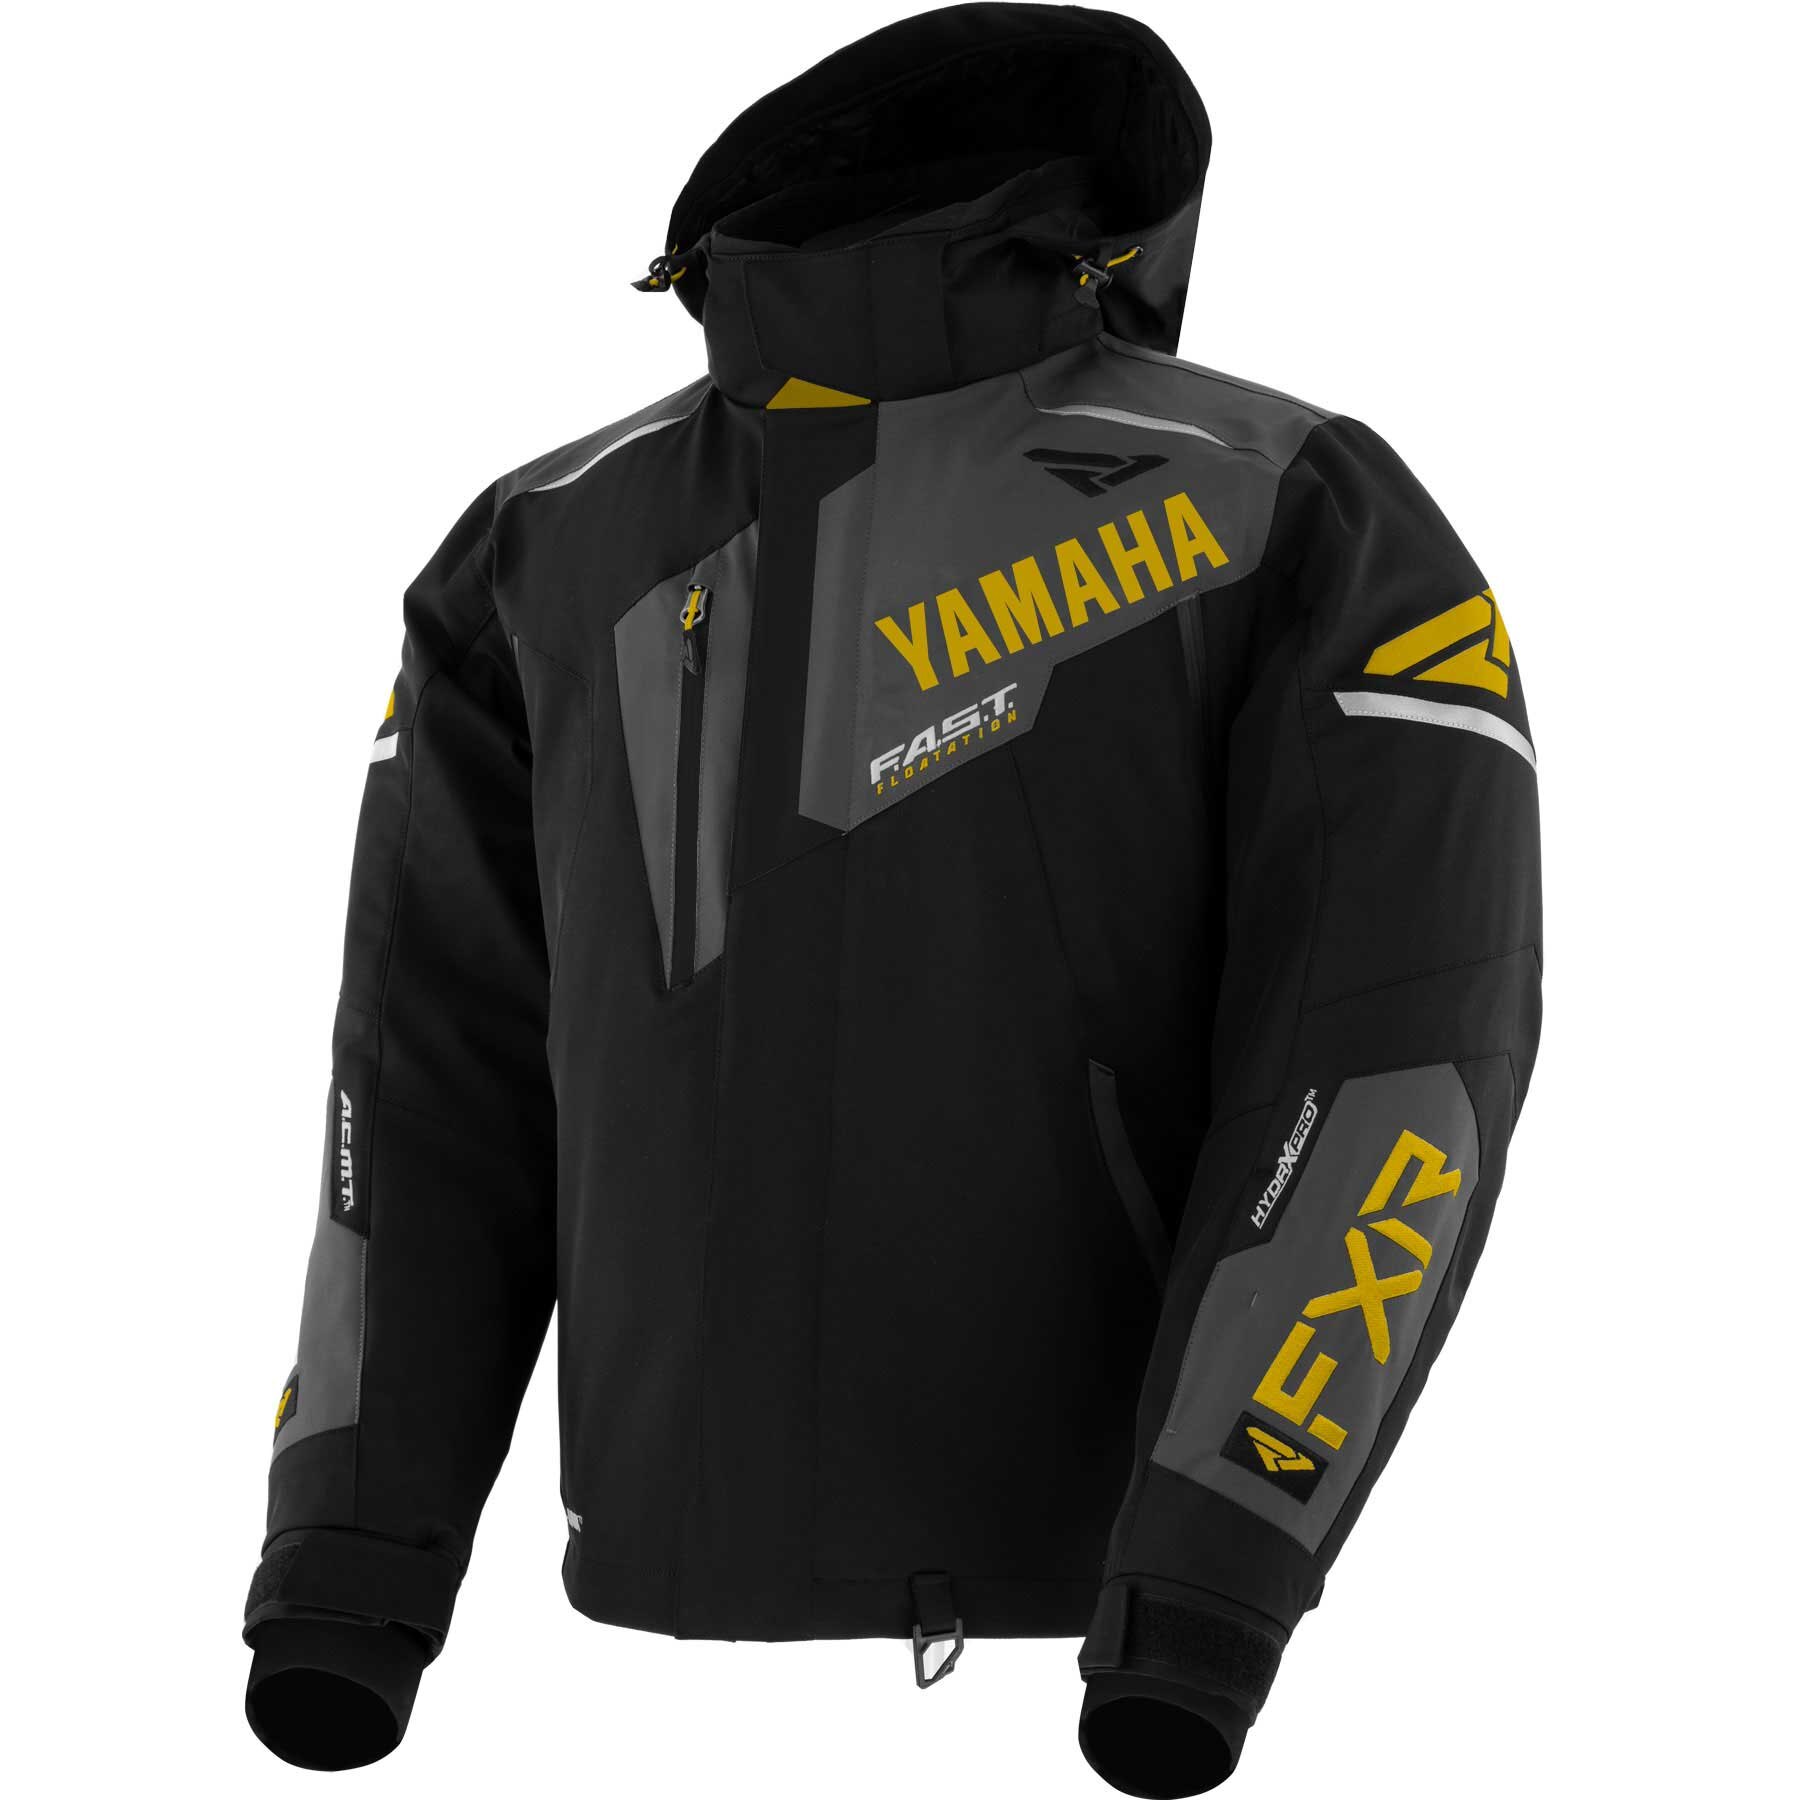 Yamaha Renegade FX Jacket by FXR® Extra Small black/charcoal/gold